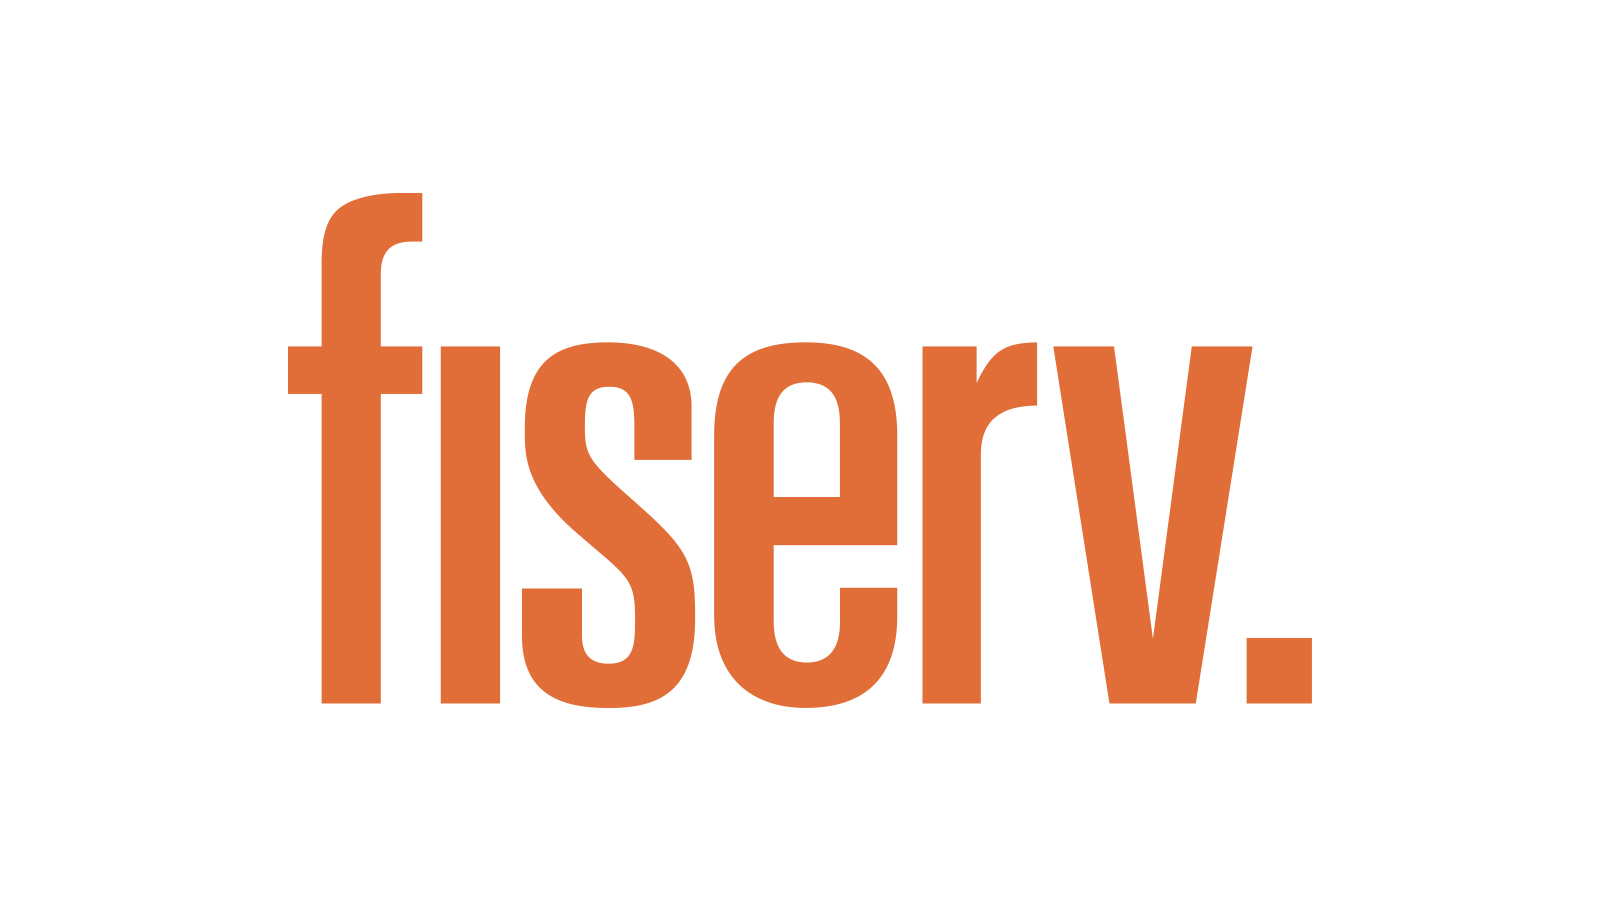 Working at Fiserv, Inc.